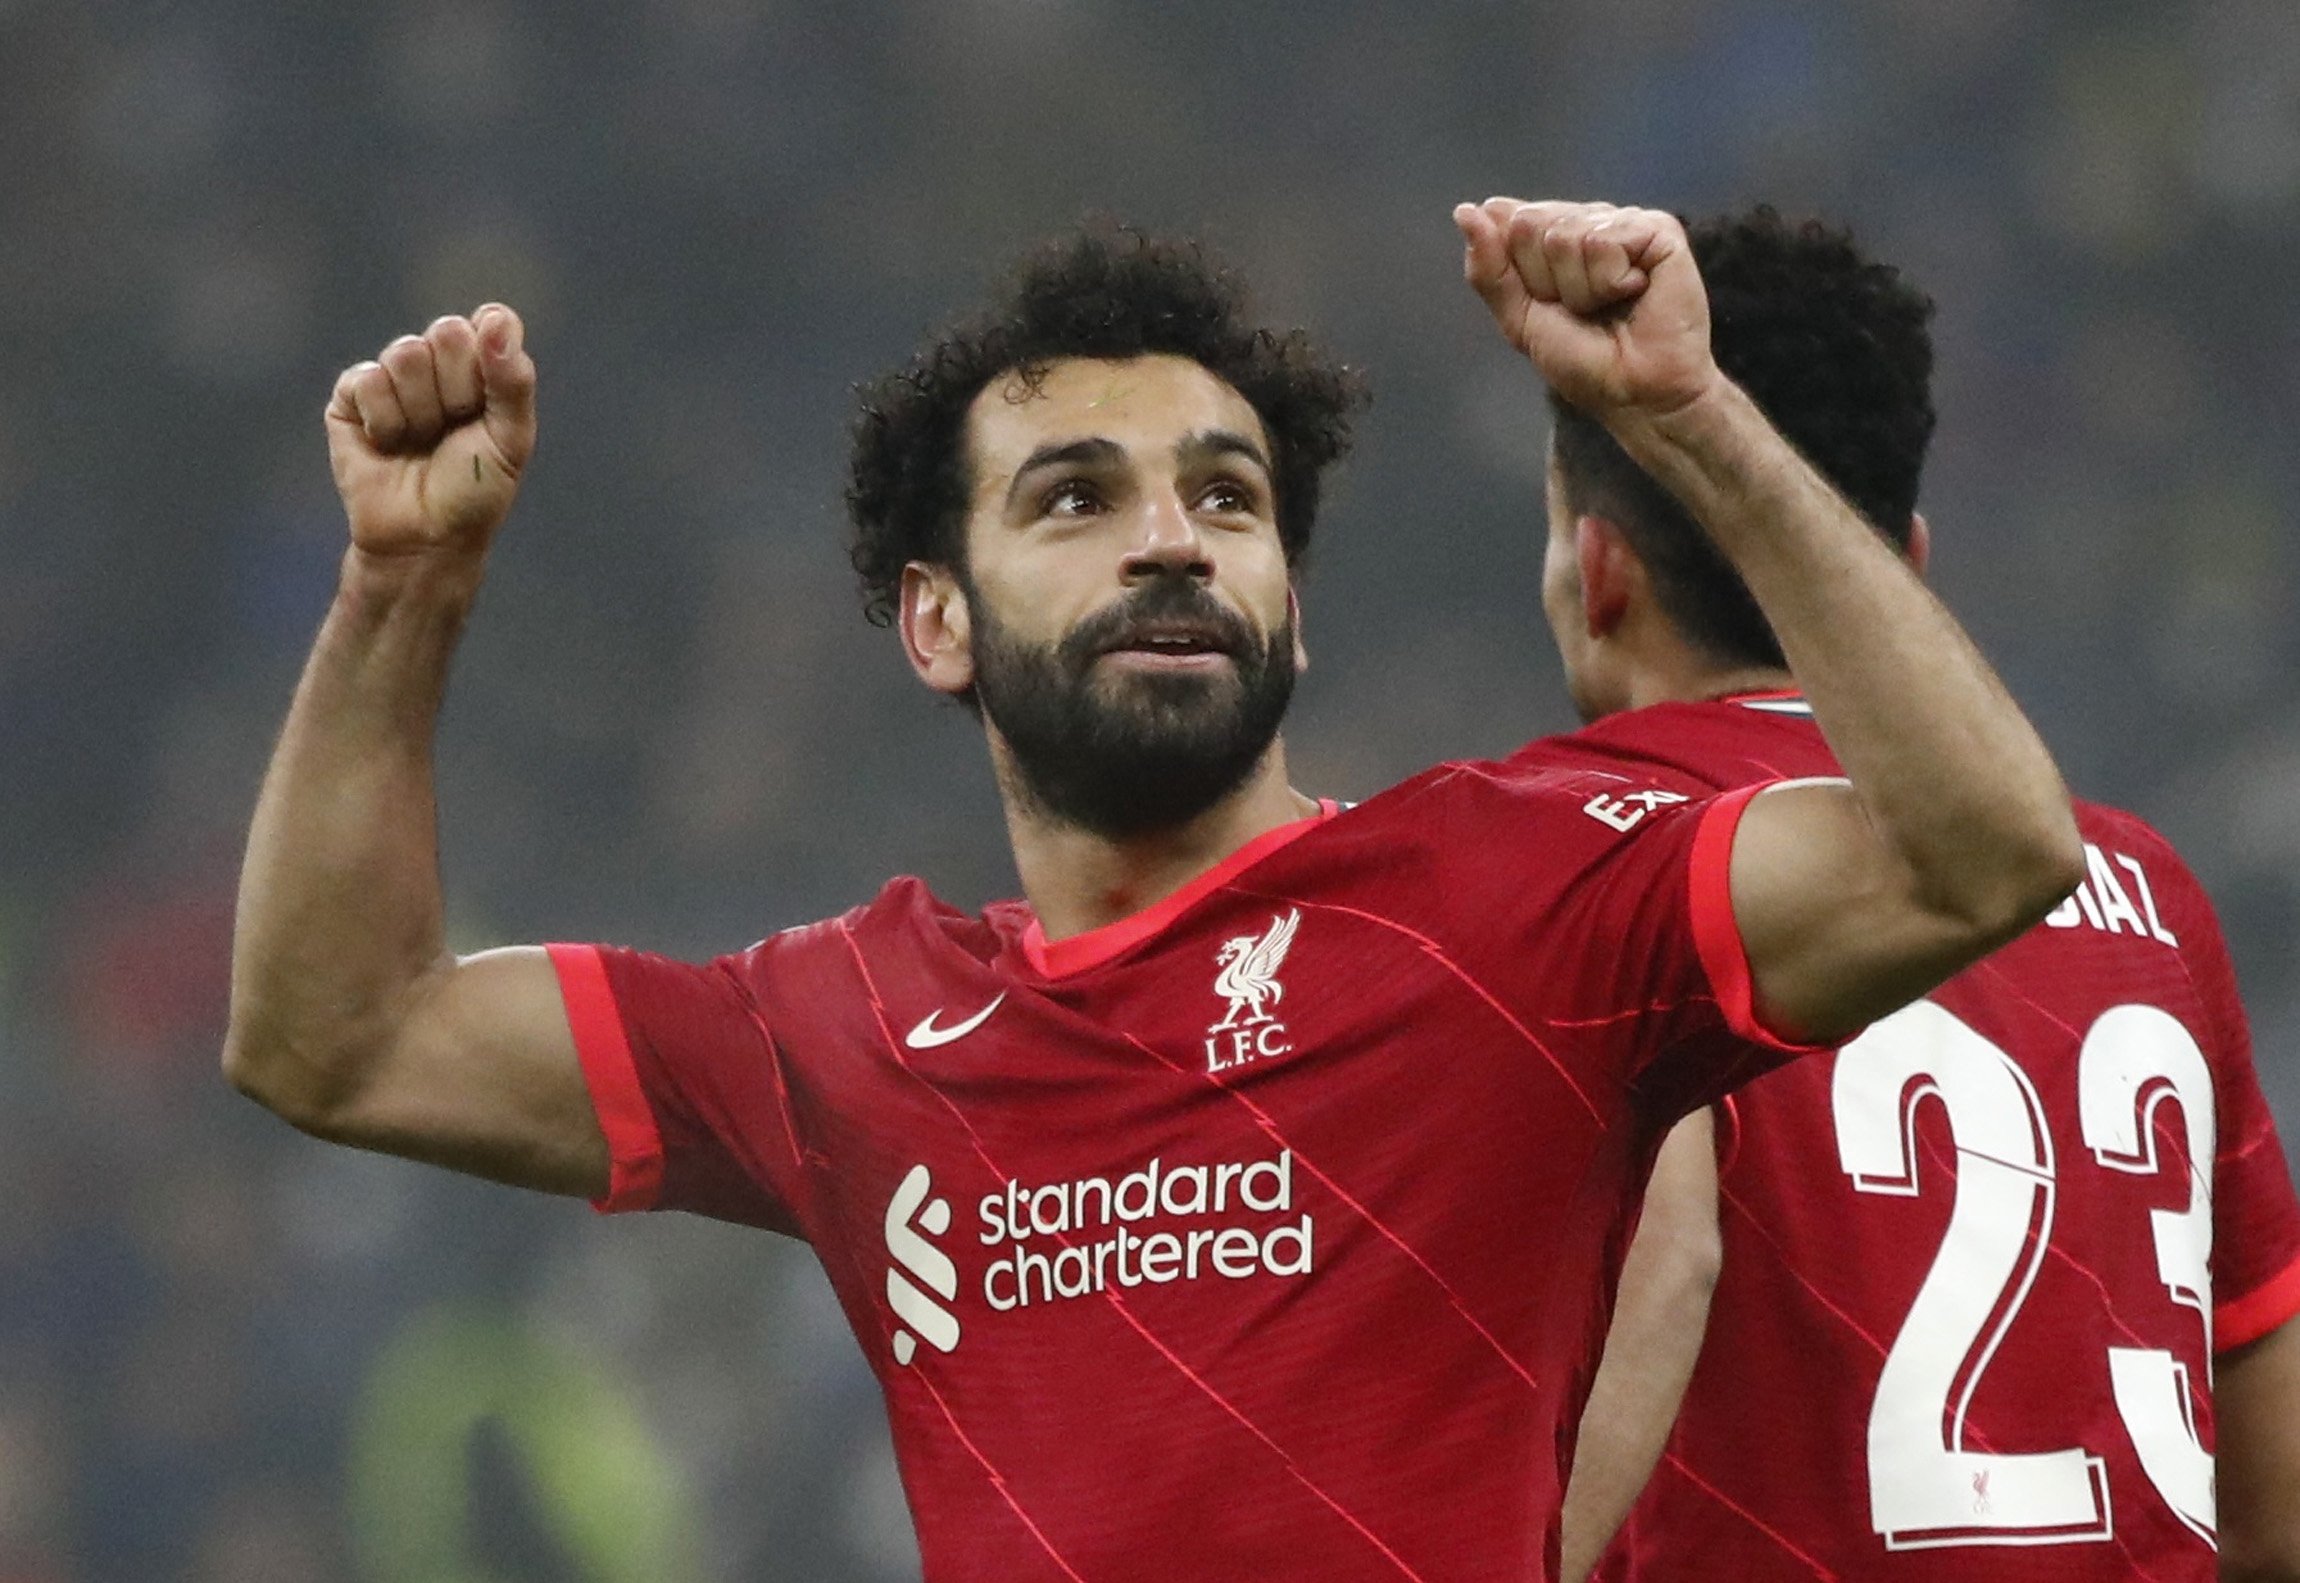 Liverpool's Mohamed Salah celebrates scoring a goal in a Champions League last-16 match against Inter Milan at the San Siro, Milan, Italy, Feb. 16, 2022. (Reuters Photo)